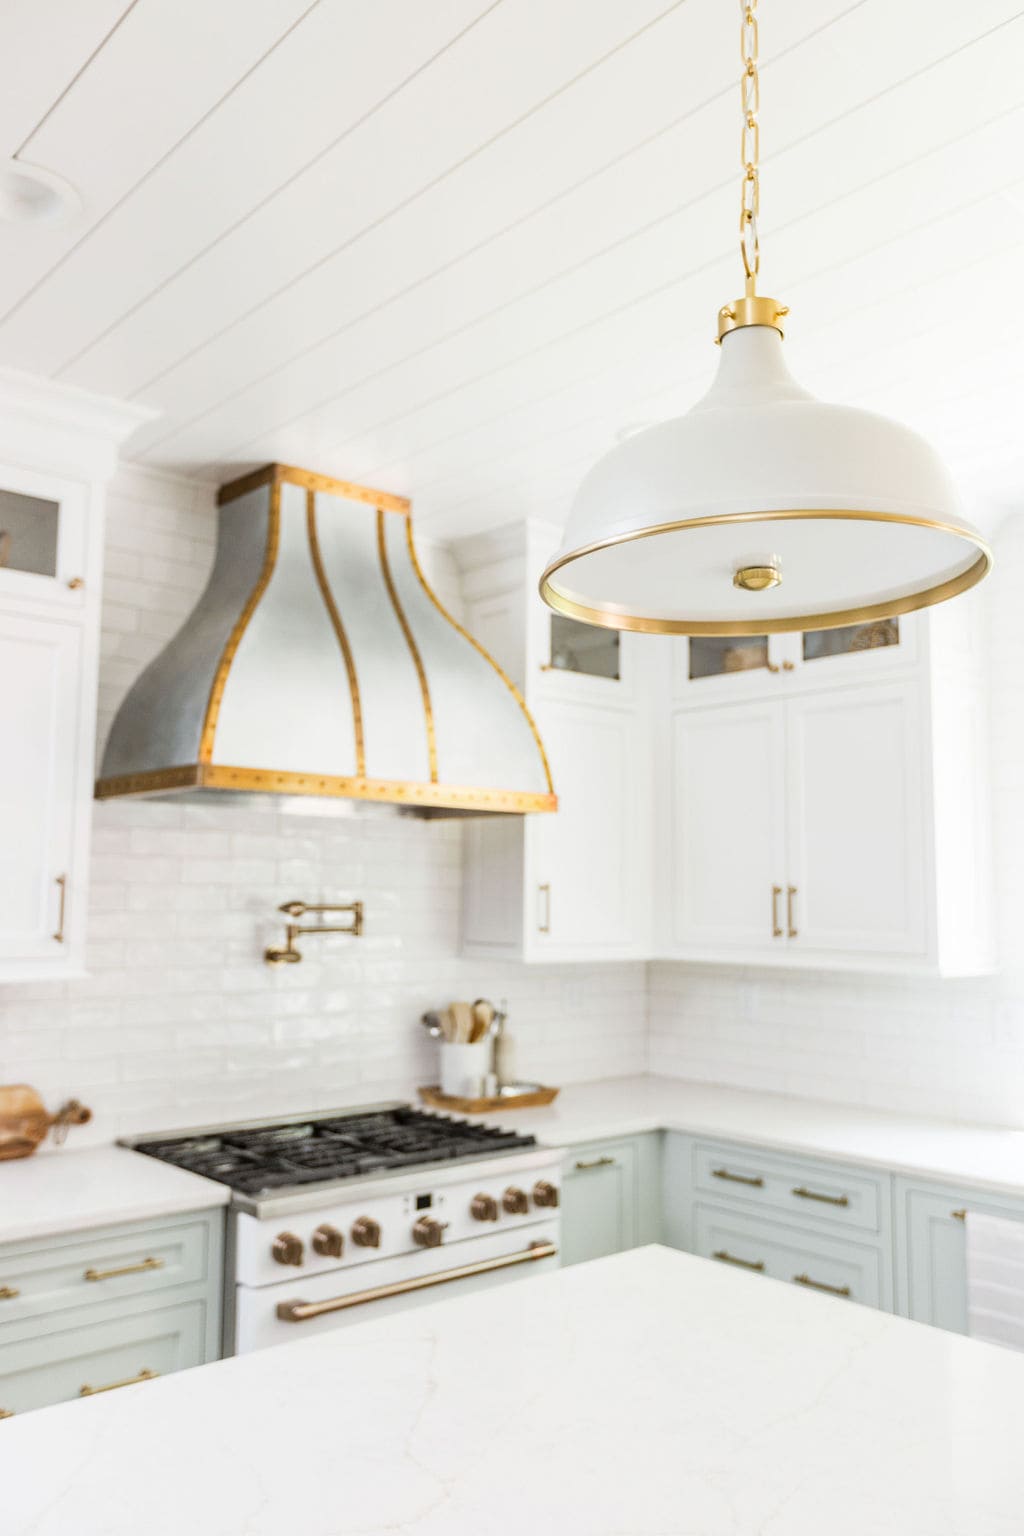 Nicholas Design Build | A stylish kitchen interior with white cabinetry, marble countertops, and a modern pendant light.